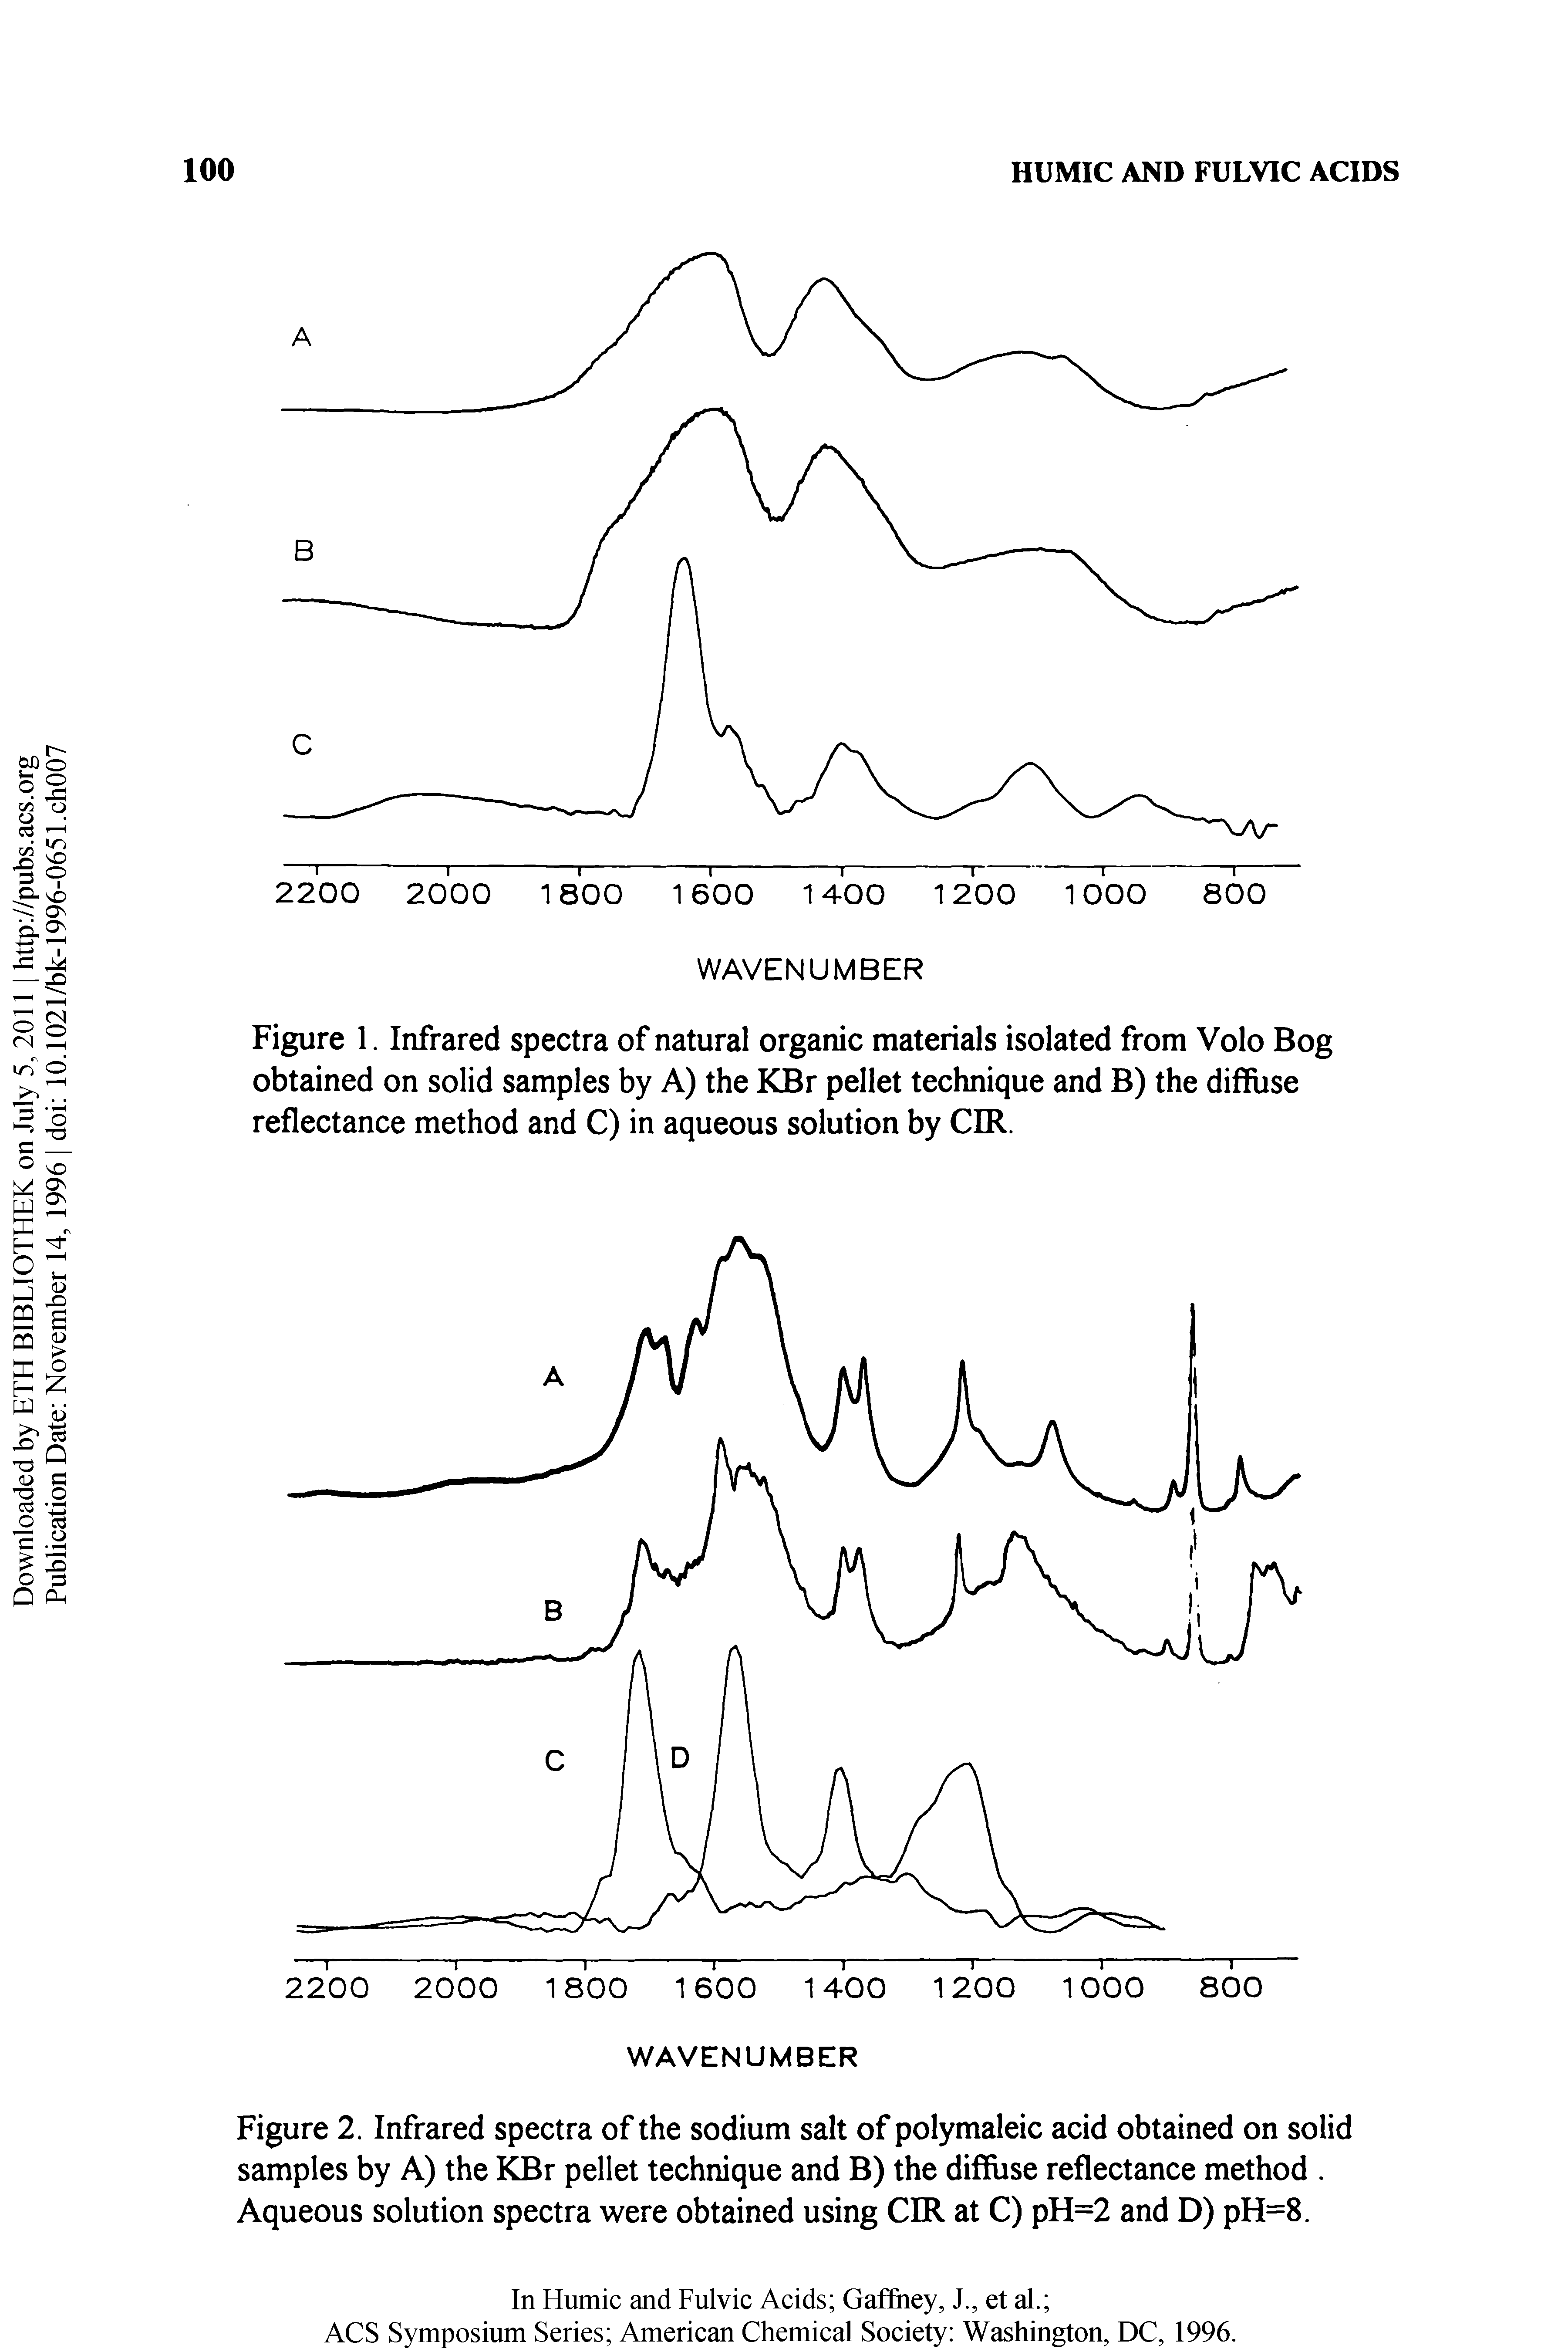 Figure 1. Infrared spectra of natural organic materials isolated from Volo Bog obtained on solid samples by A) the KBr pellet technique and B) the diffuse reflectance method and C) in aqueous solution by CIR.